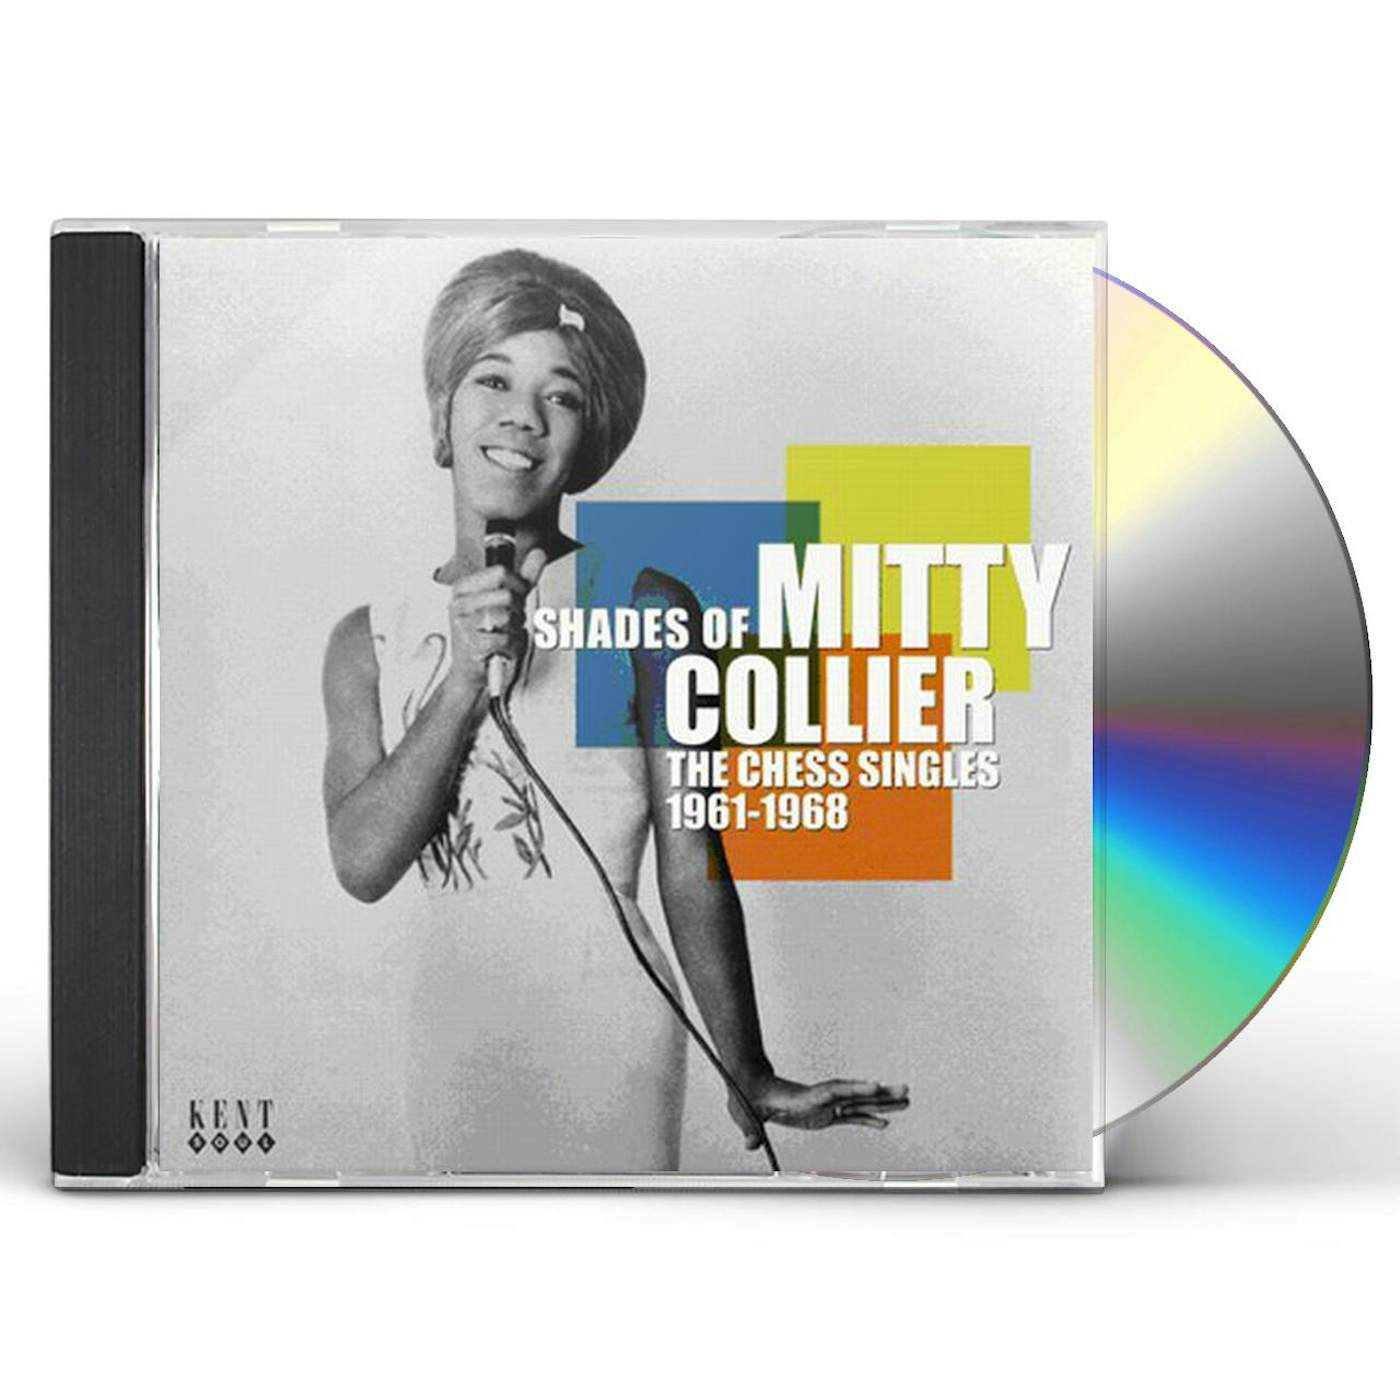 Mitty Collier SHADES OF: THE CHESS SINGLES 1961-1968 CD